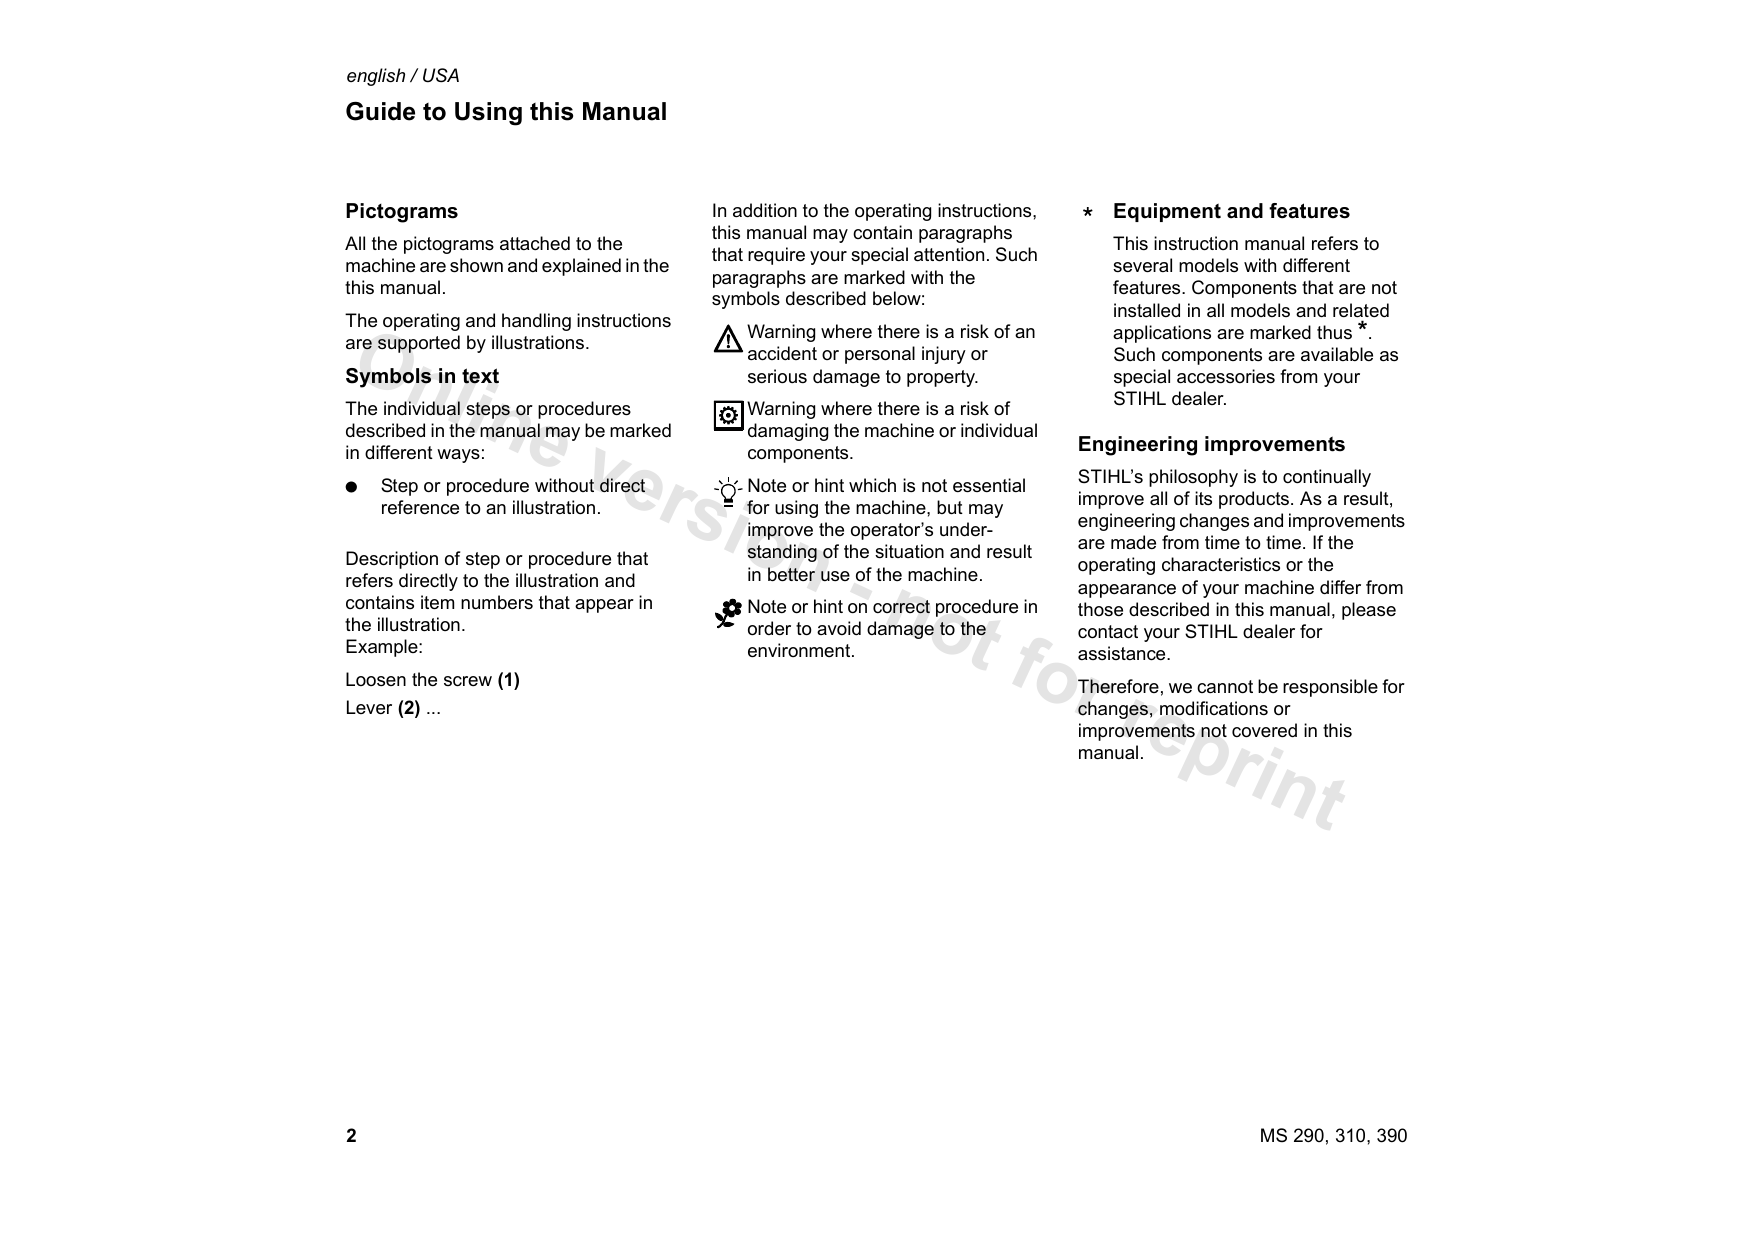 Stihl 290 310 390 chainsaw service manual Preview image 2